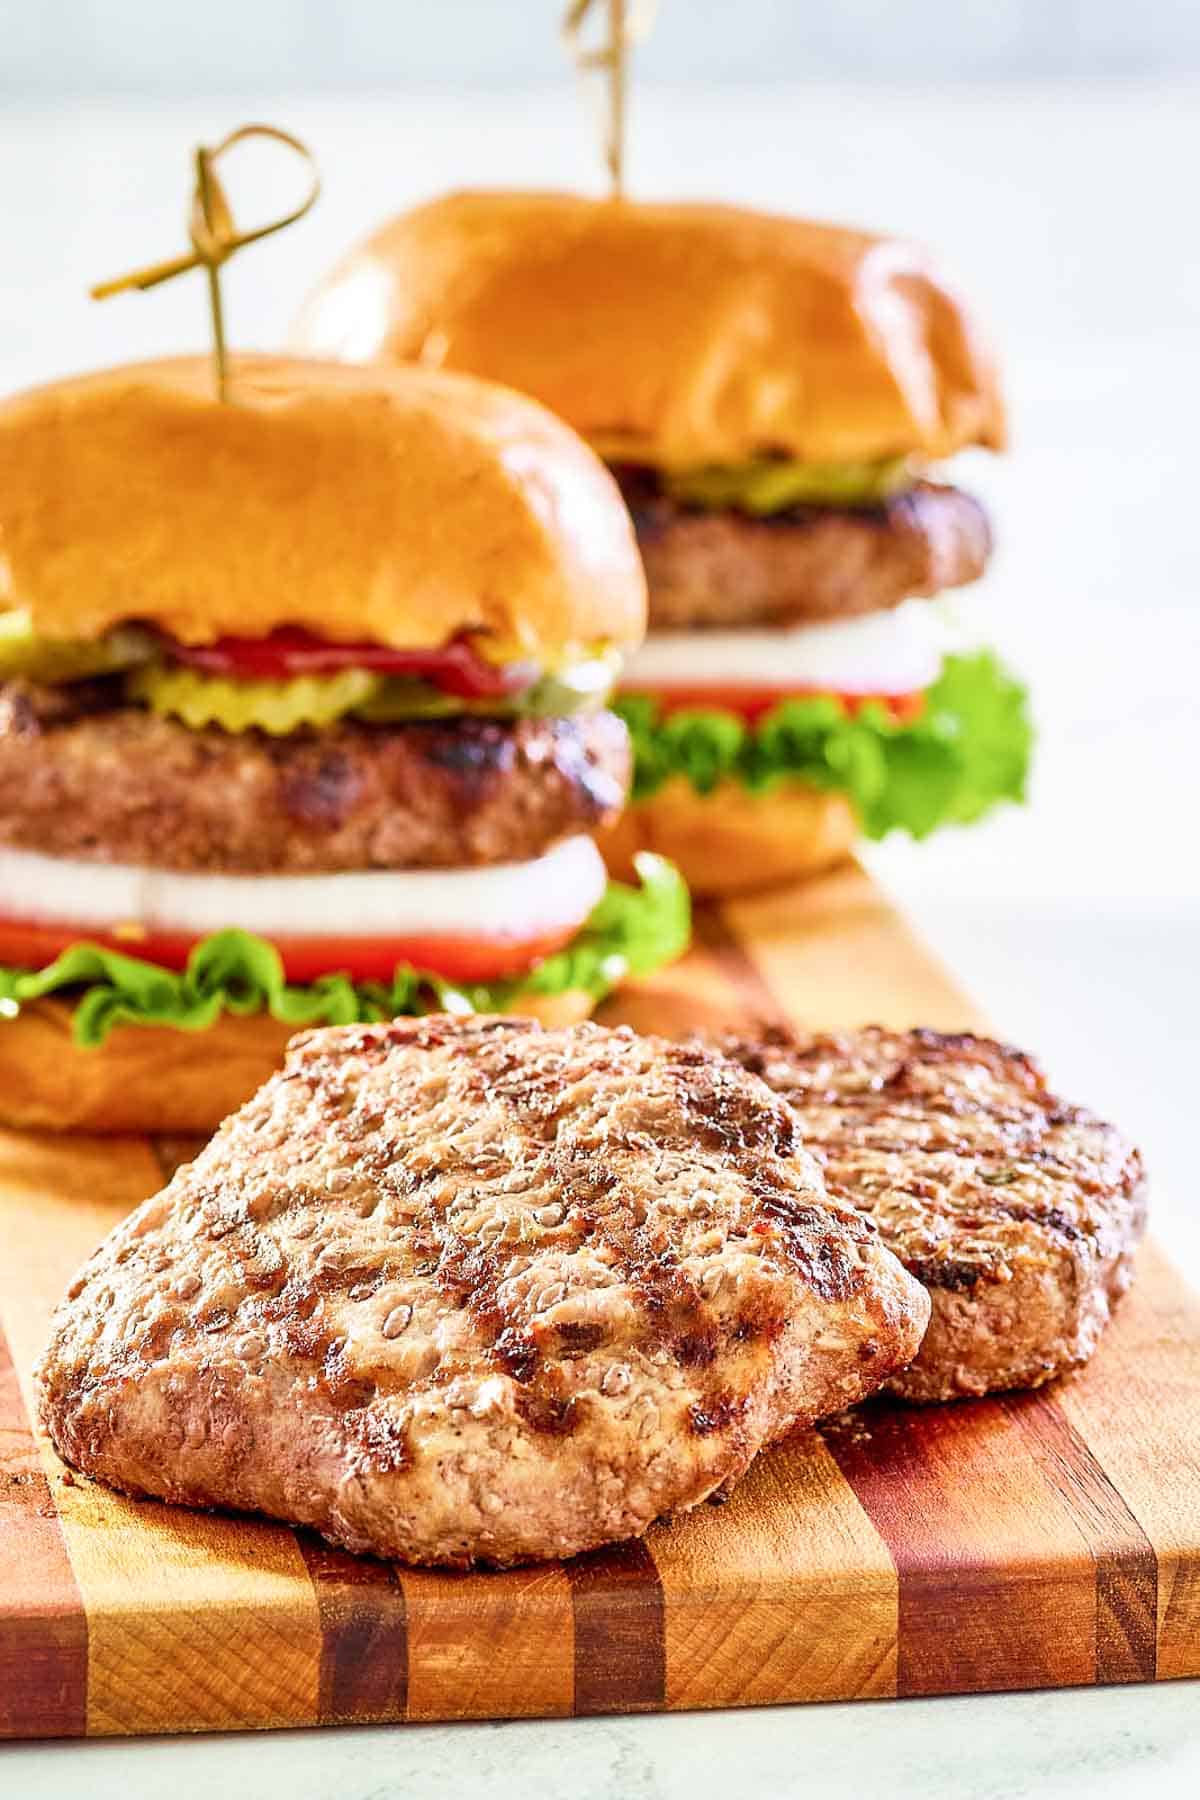 Grilled frozen burger patties and burgers on a wood board.